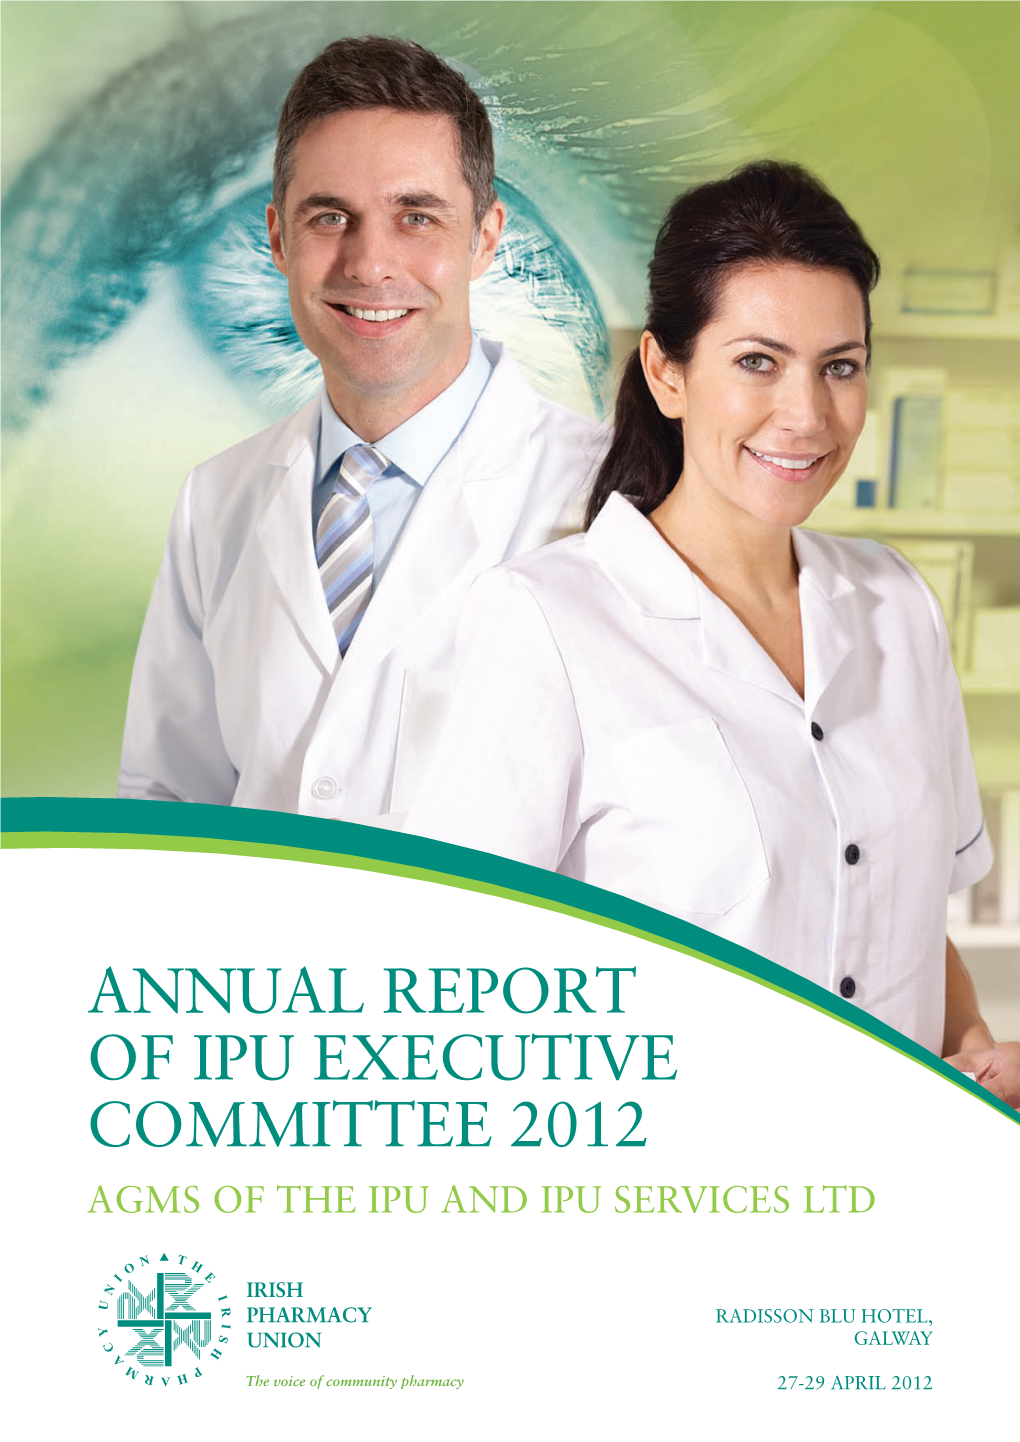 Annual Report of IPU Executive Committee 2012 Agms of the Ipu and Ipu Services Ltd